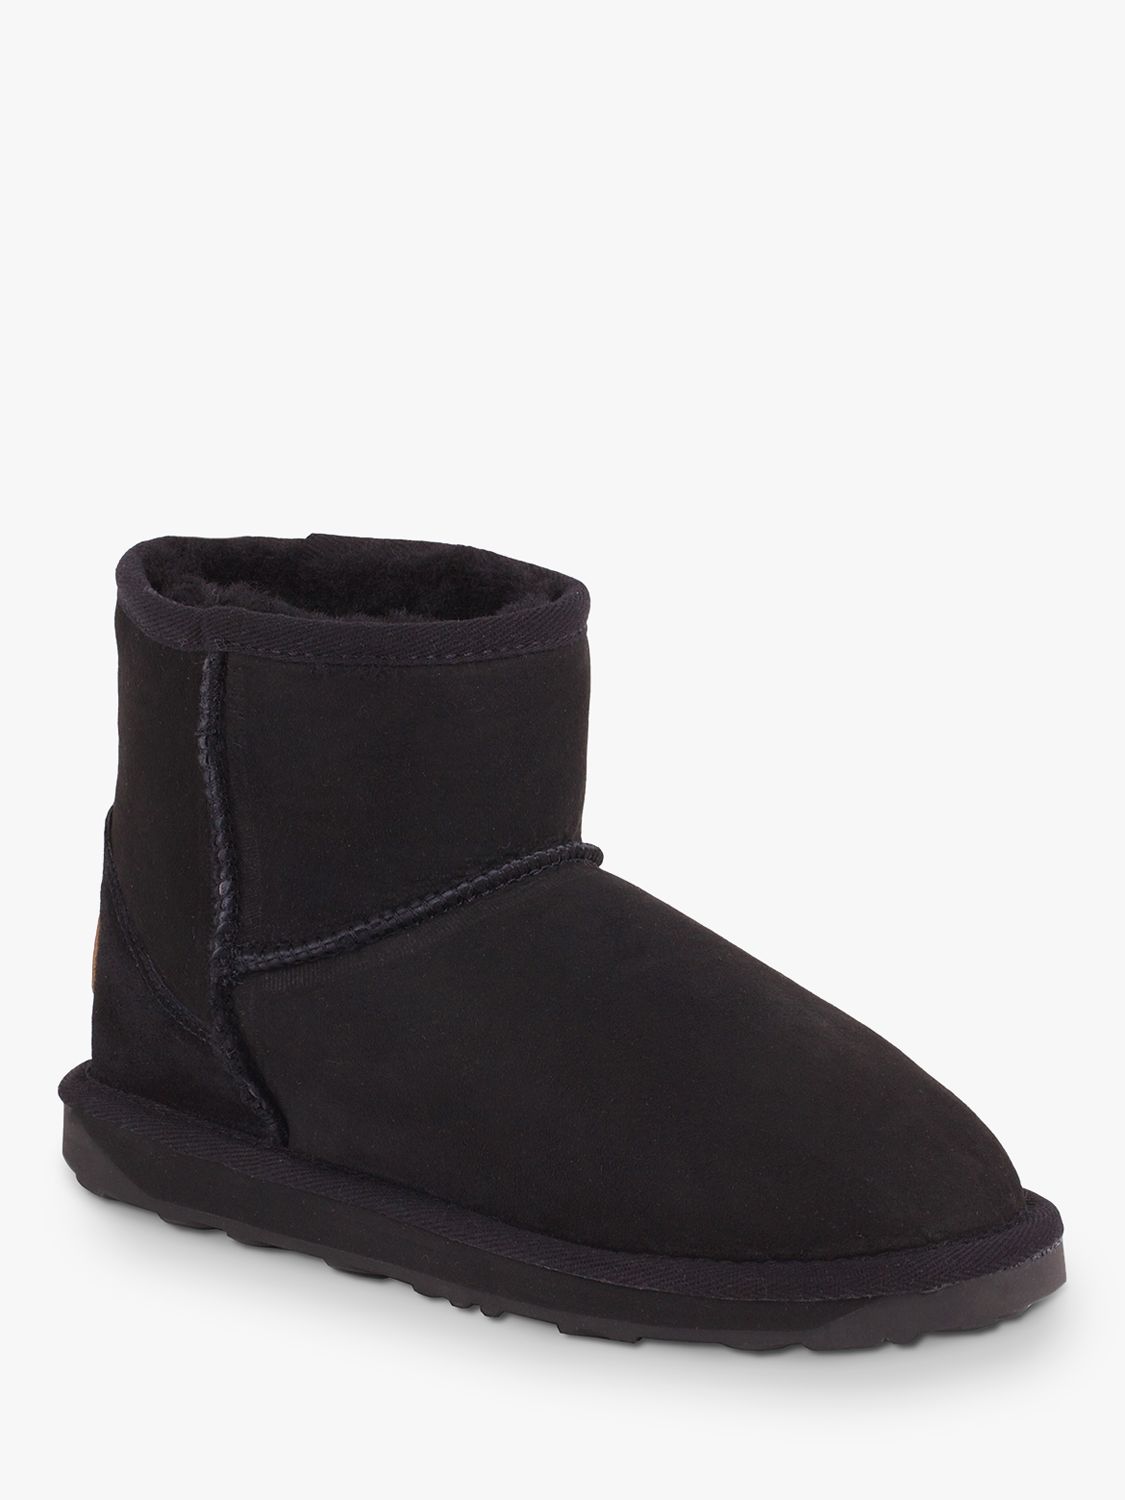 Buy Just Sheepskin Mini Classic Boots Online at johnlewis.com